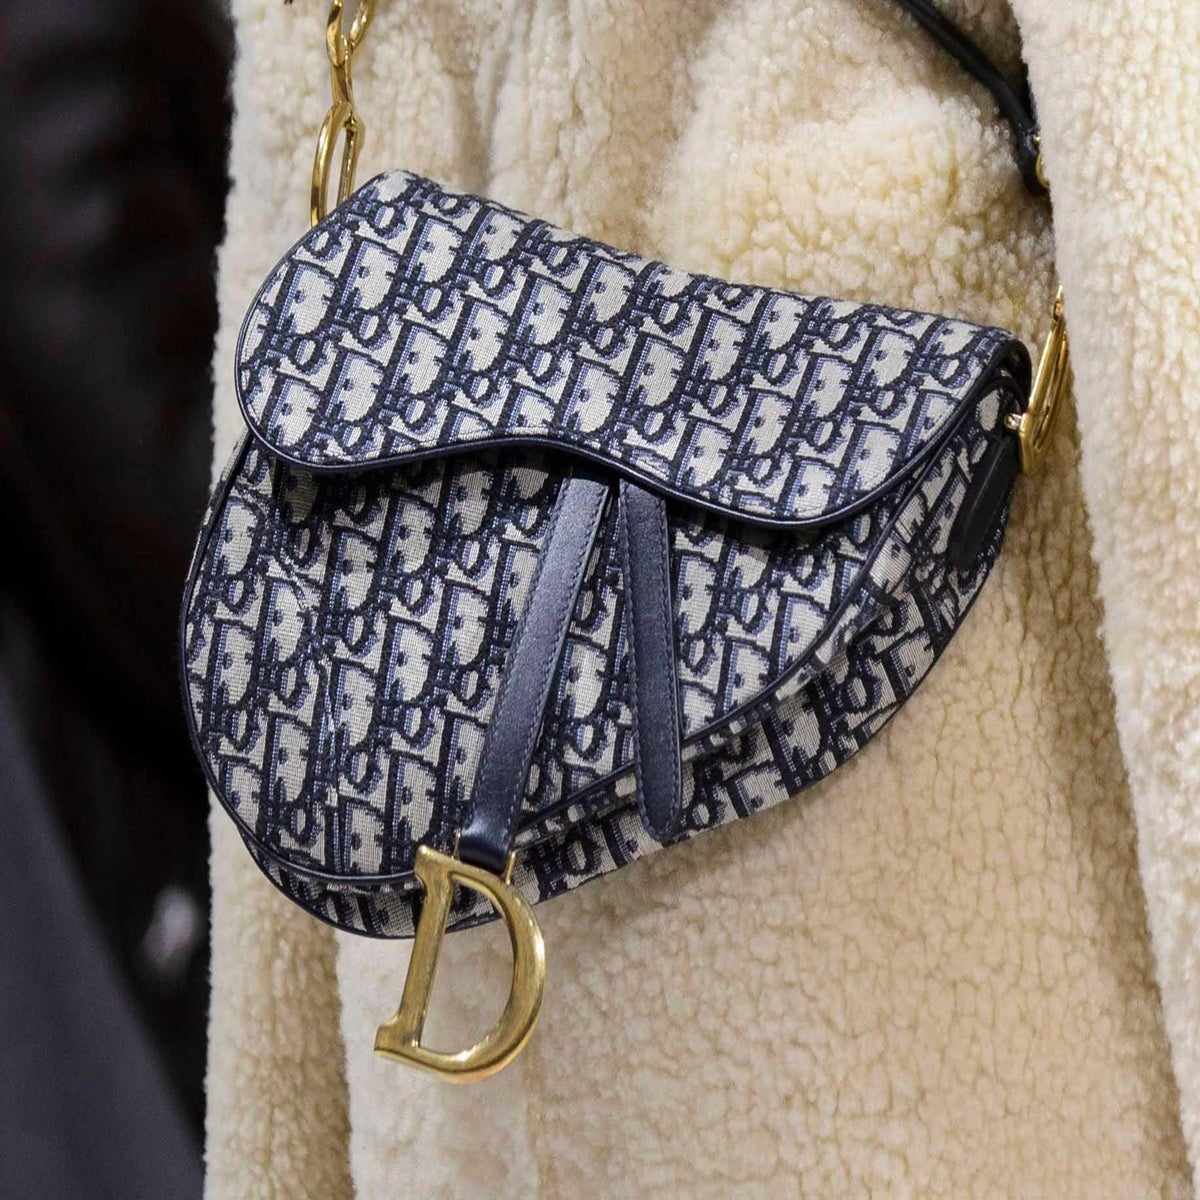 Dior's iconic saddle bag from the noughties is back, London Evening  Standard